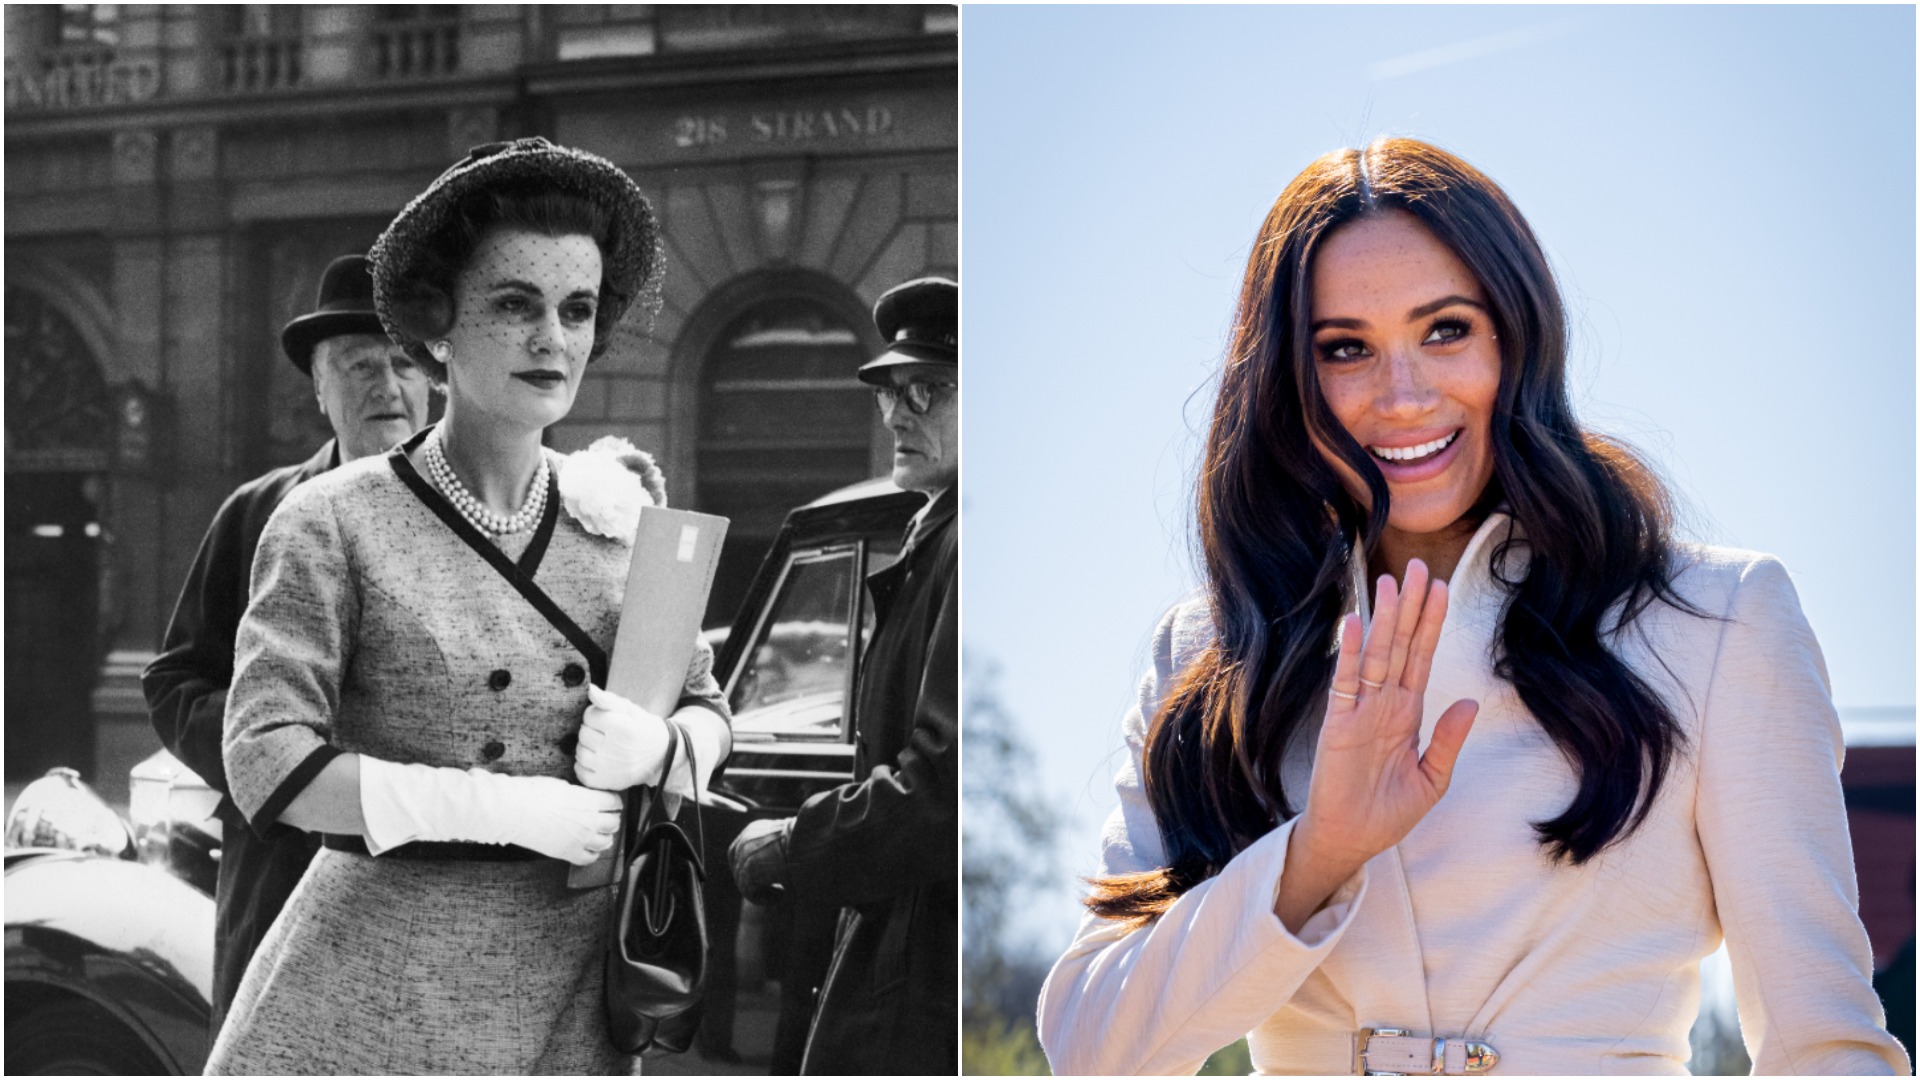 Black and white photo of the Duchess of Argyll next to color image of Meghan Markle at 2022 Invictus Games